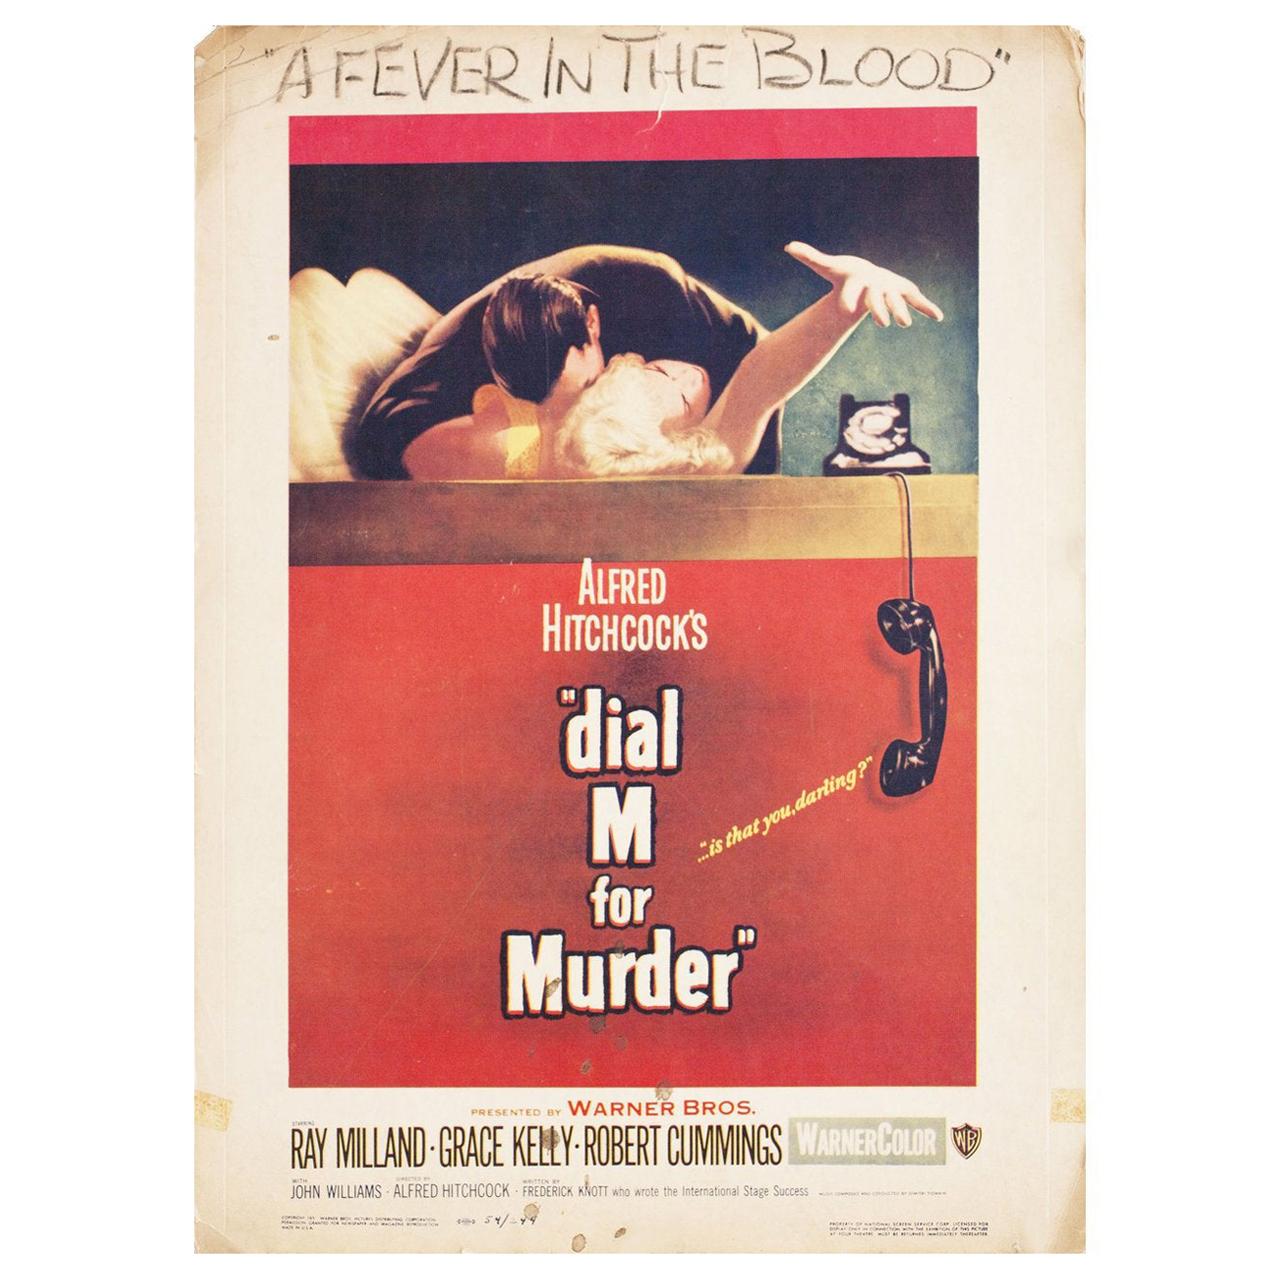 "Dial M for Murder" 1954 U.S. Window Card Film Poster